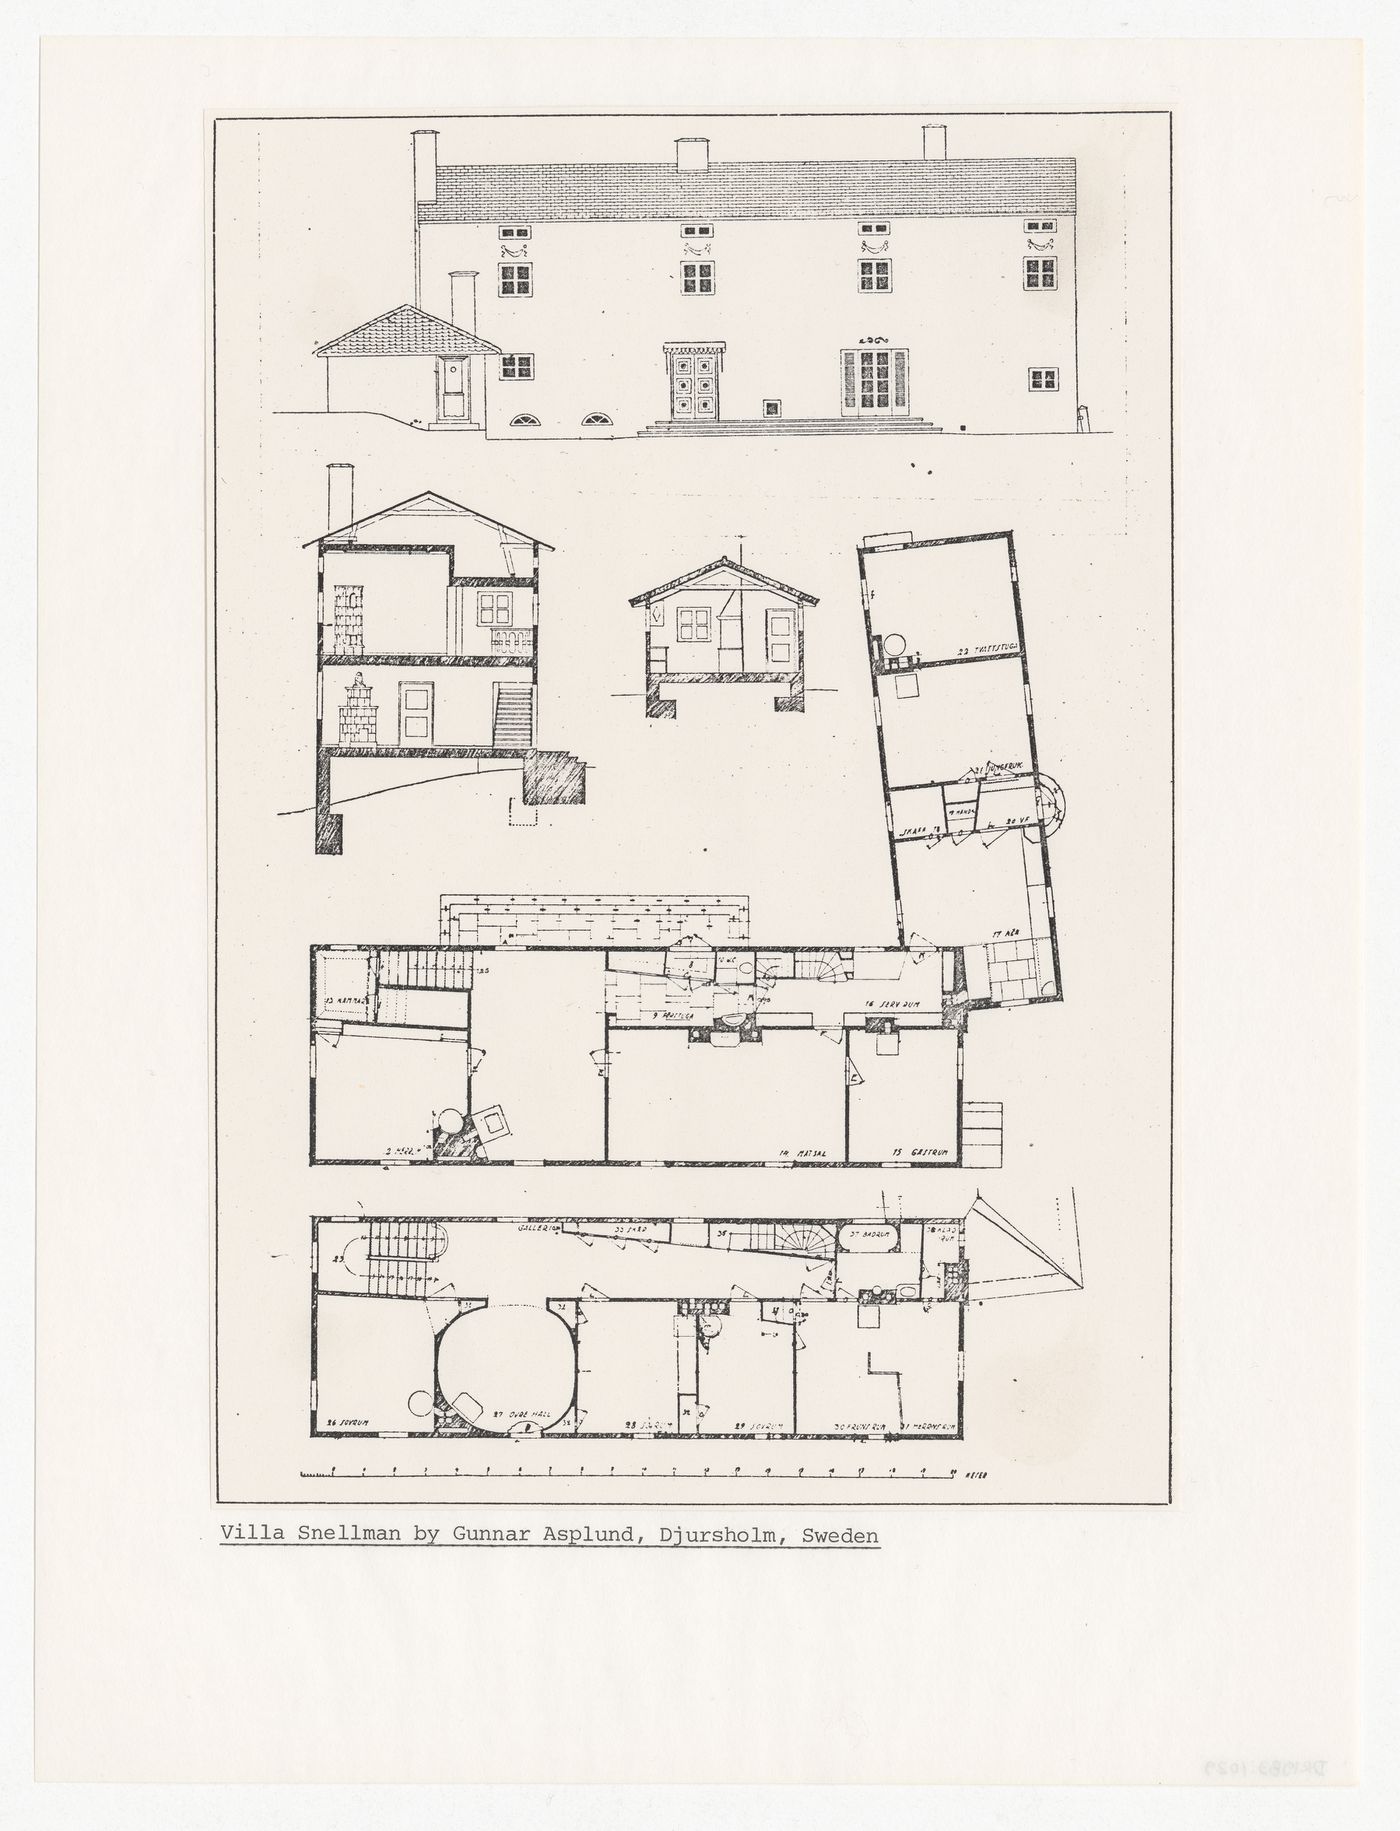 Elevations, sections and plans for Villa Snellman, Djursholm, Sweden (from The Nofamily House reference materials)